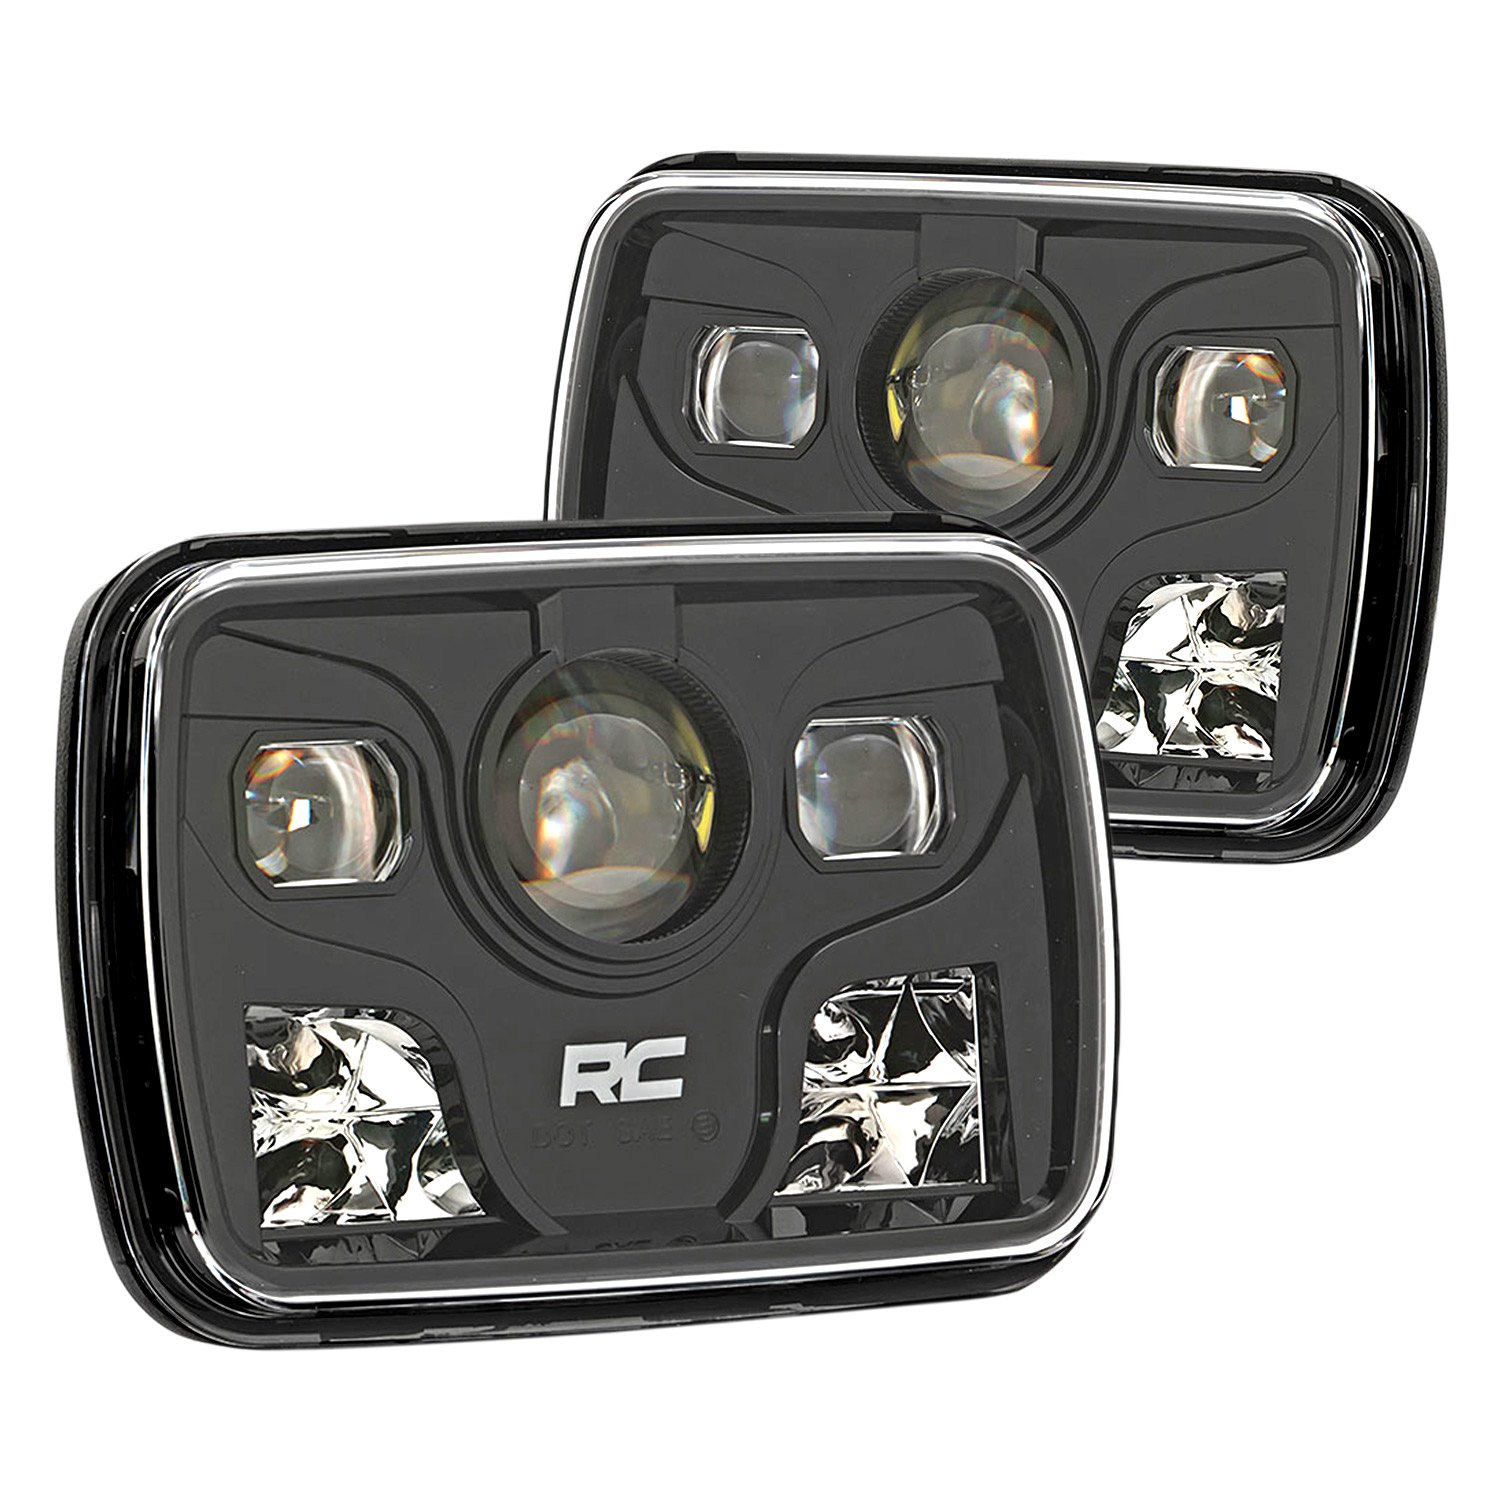 Rough Country® RCH5200 - 7x6 Rectangular Black Projector LED Headlights